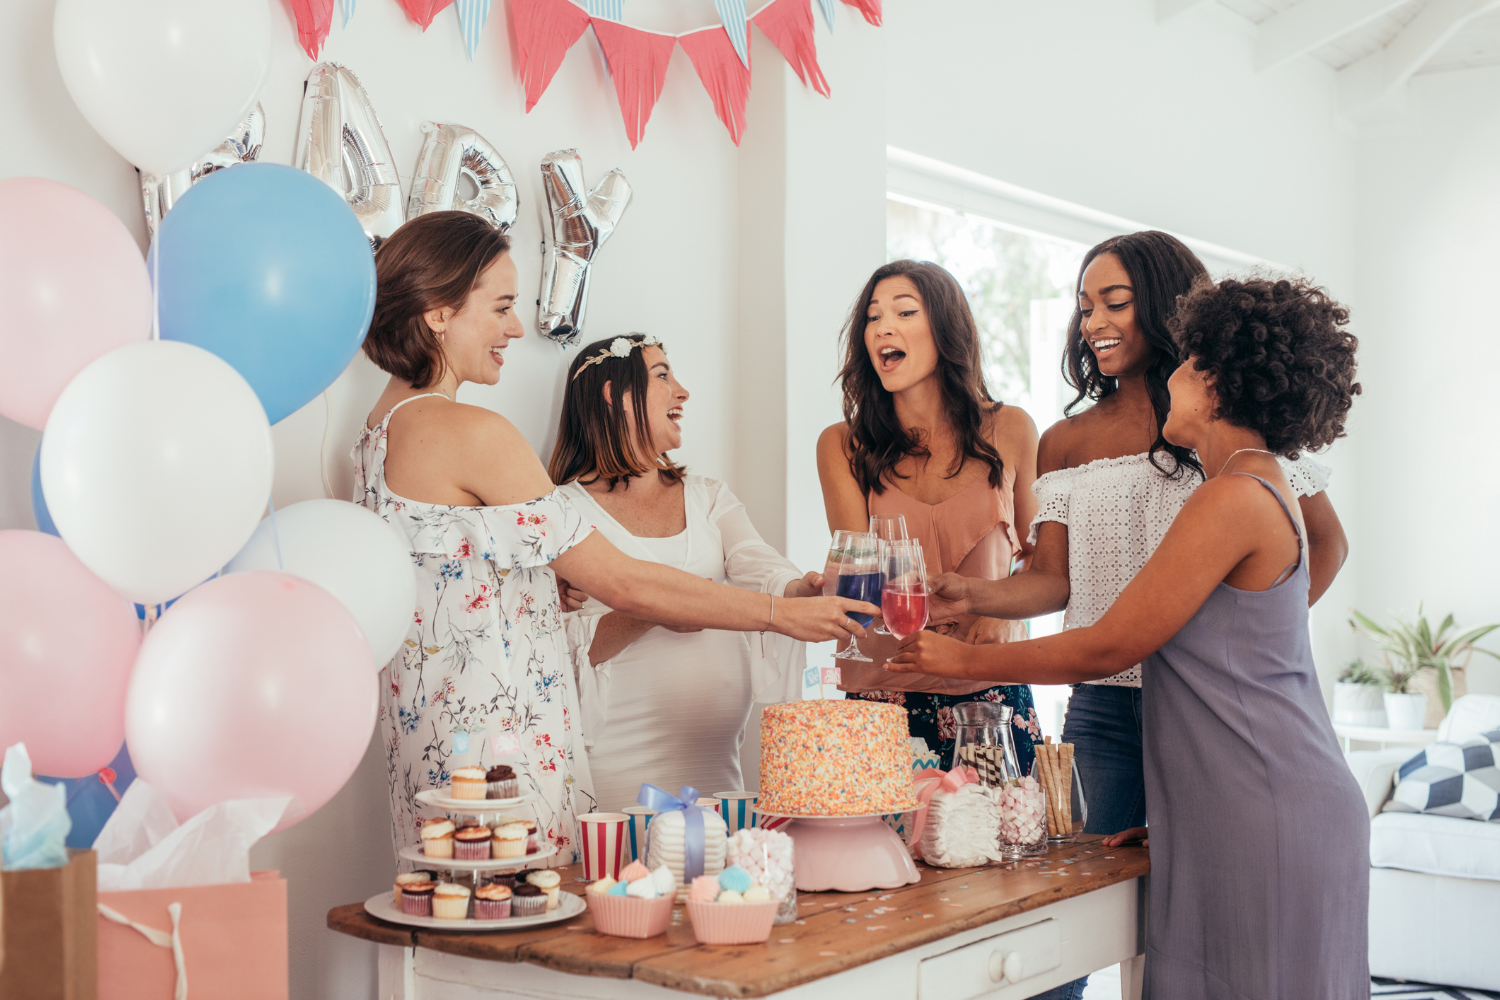 Top 5 Baby Shower Gifts for Parents